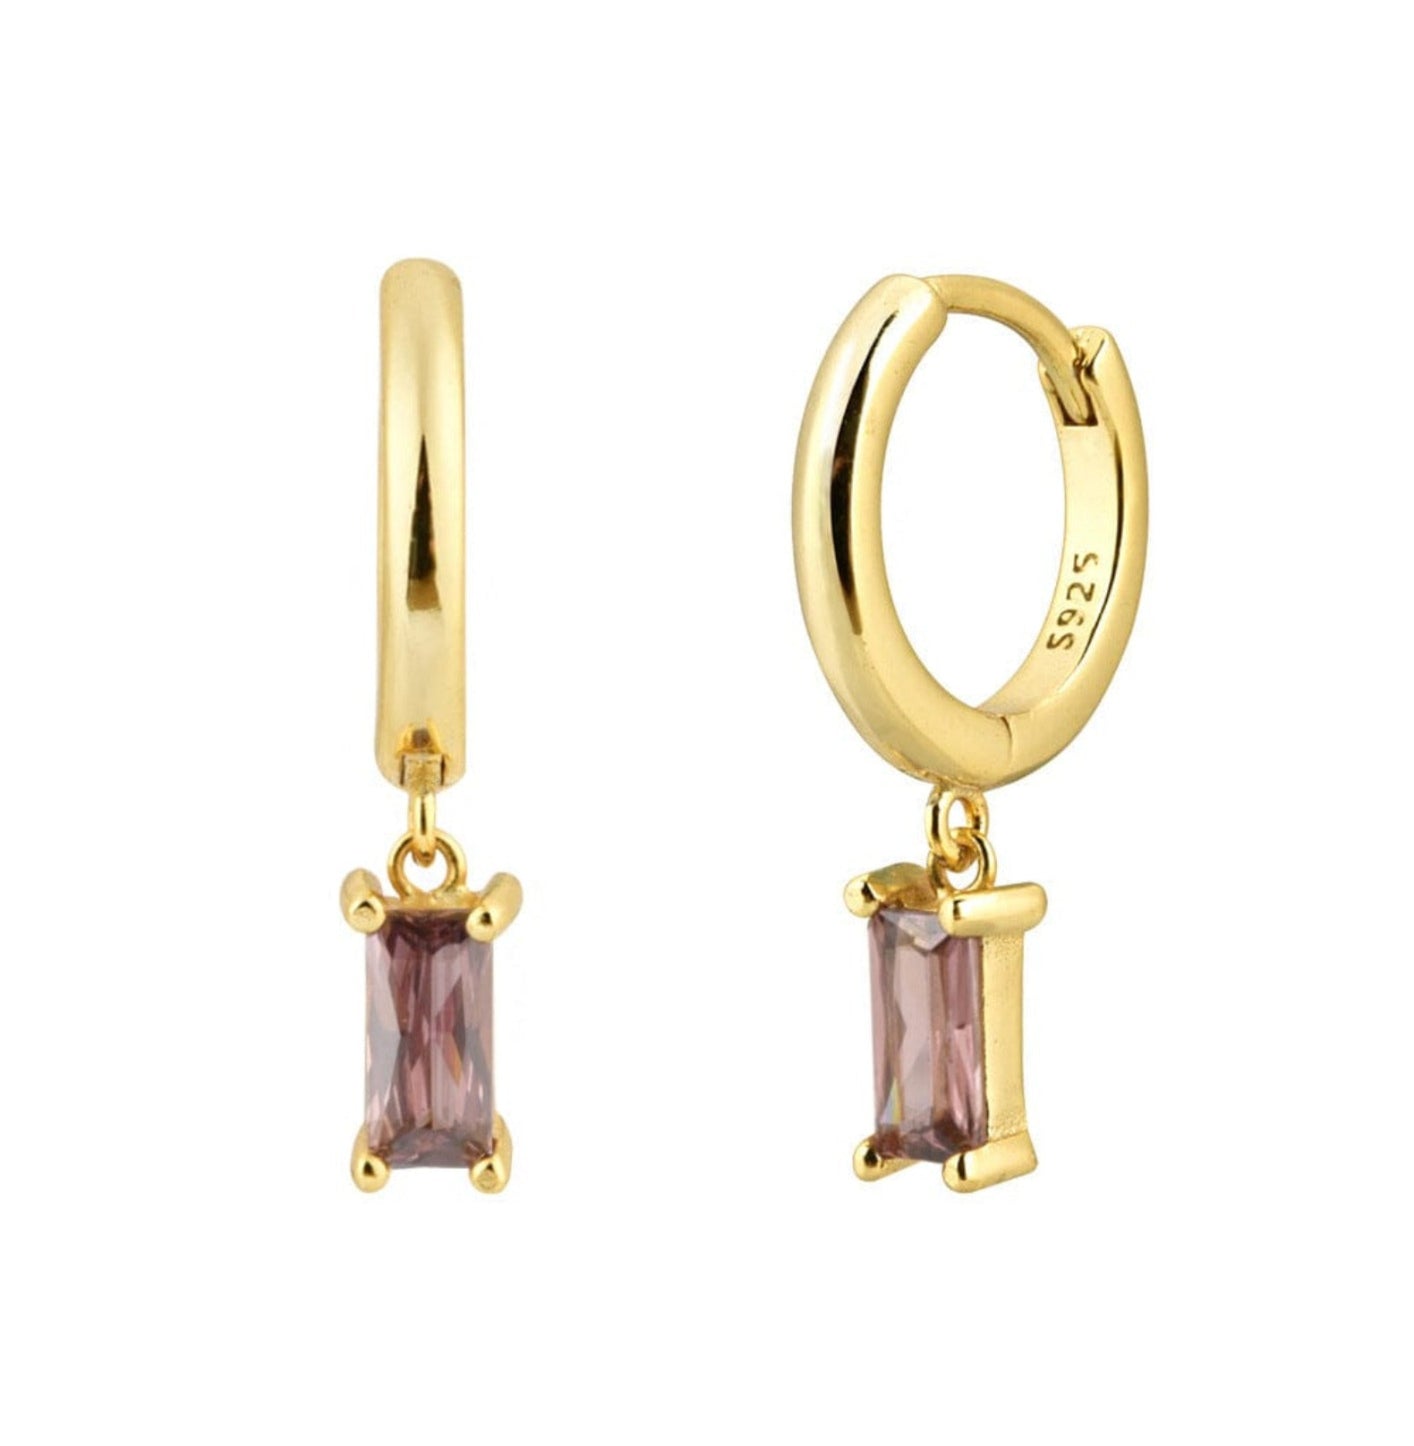 DAINTY EARRINGS earing Yubama Jewelry Online Store - The Elegant Designs of Gold and Silver ! Zirconium 